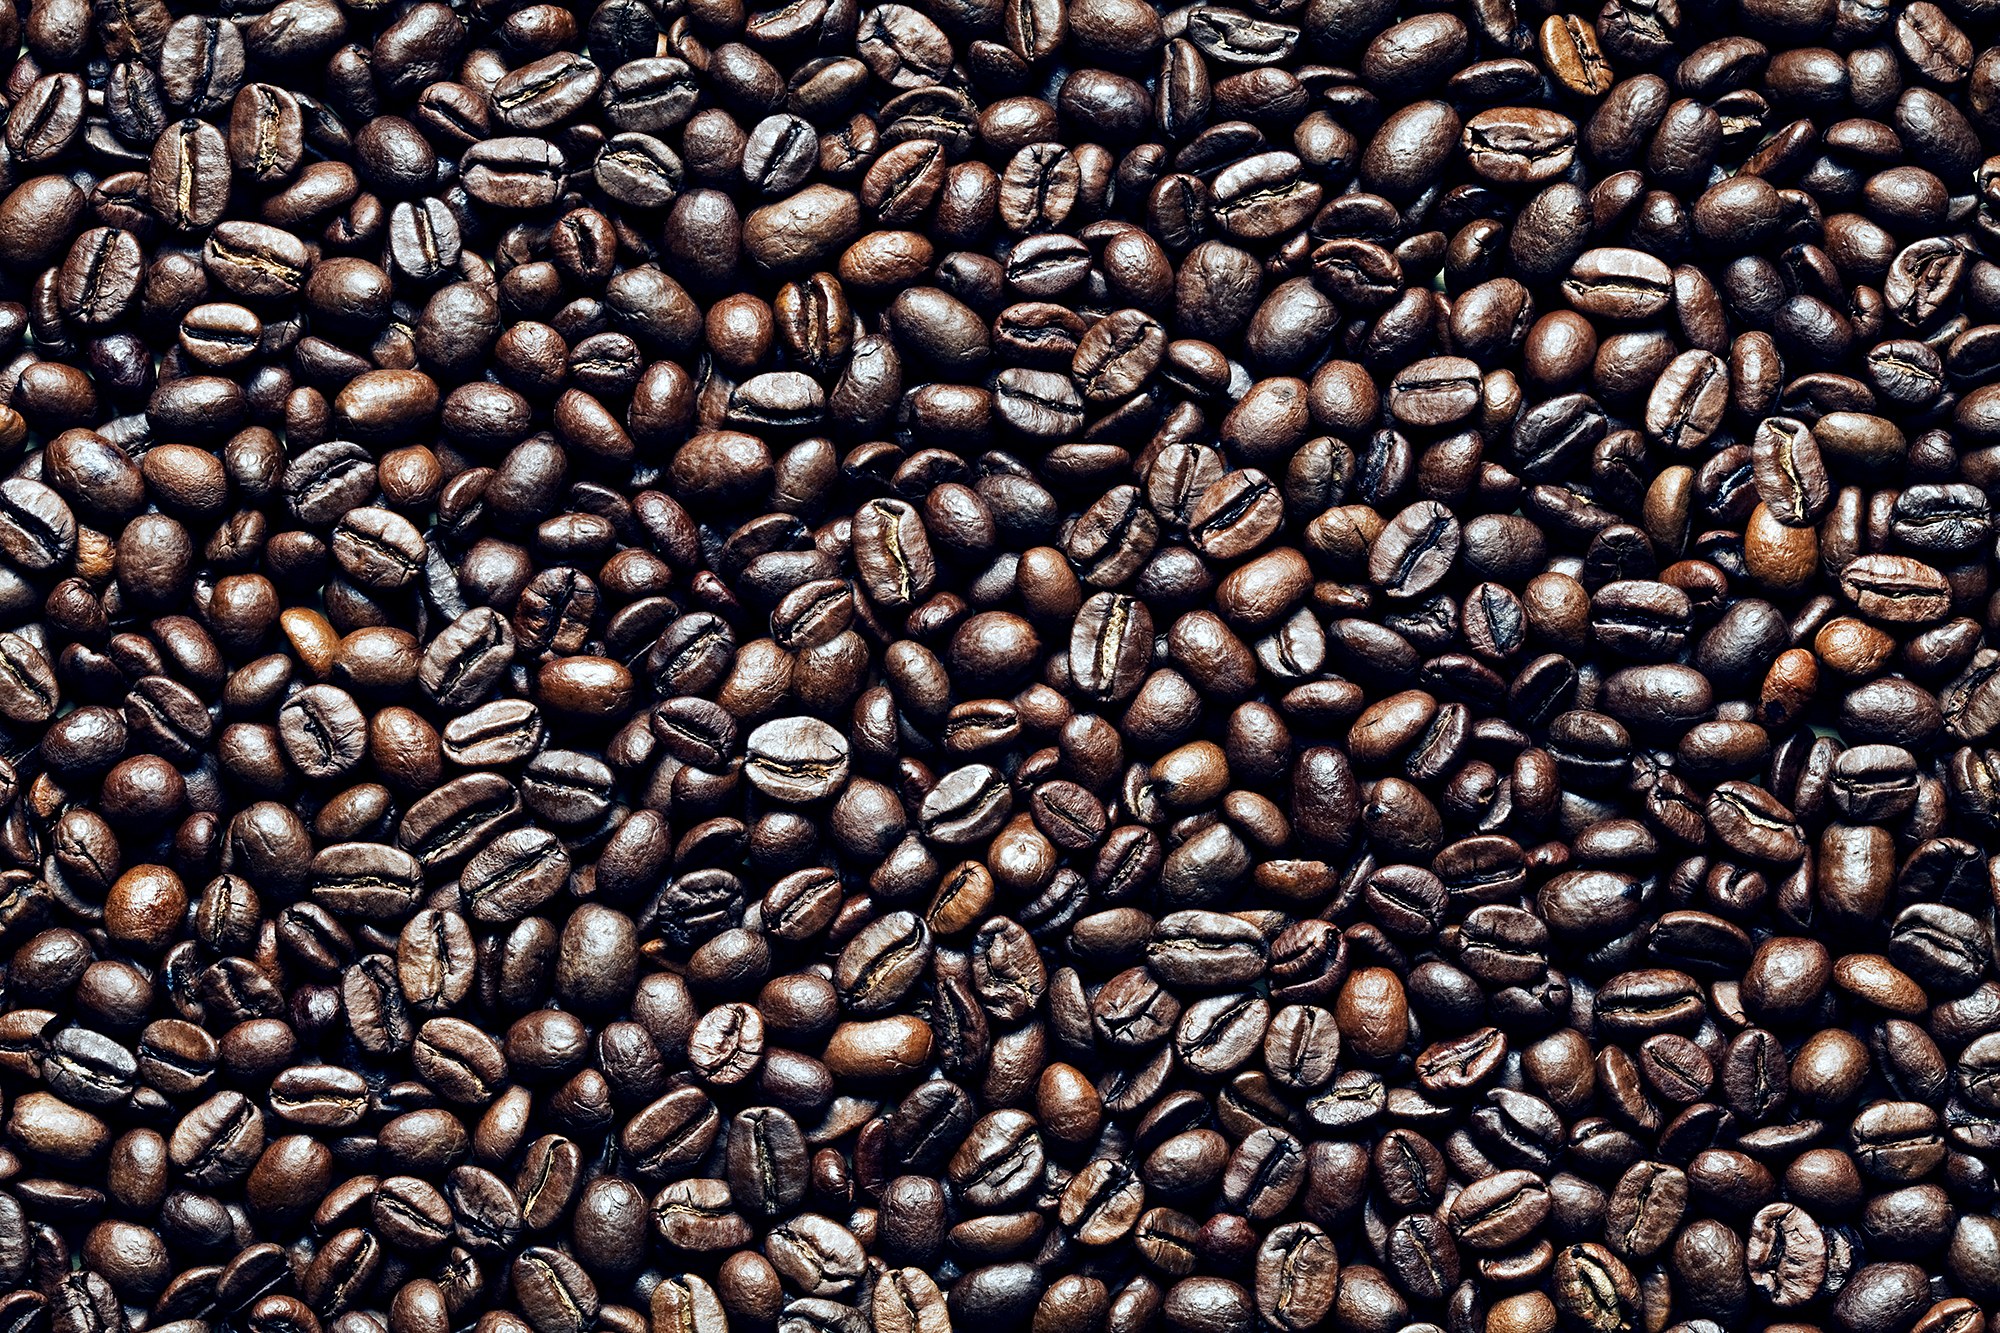 Chemicals From Roasting Coffee May Be Cramping Lungs | WIRED